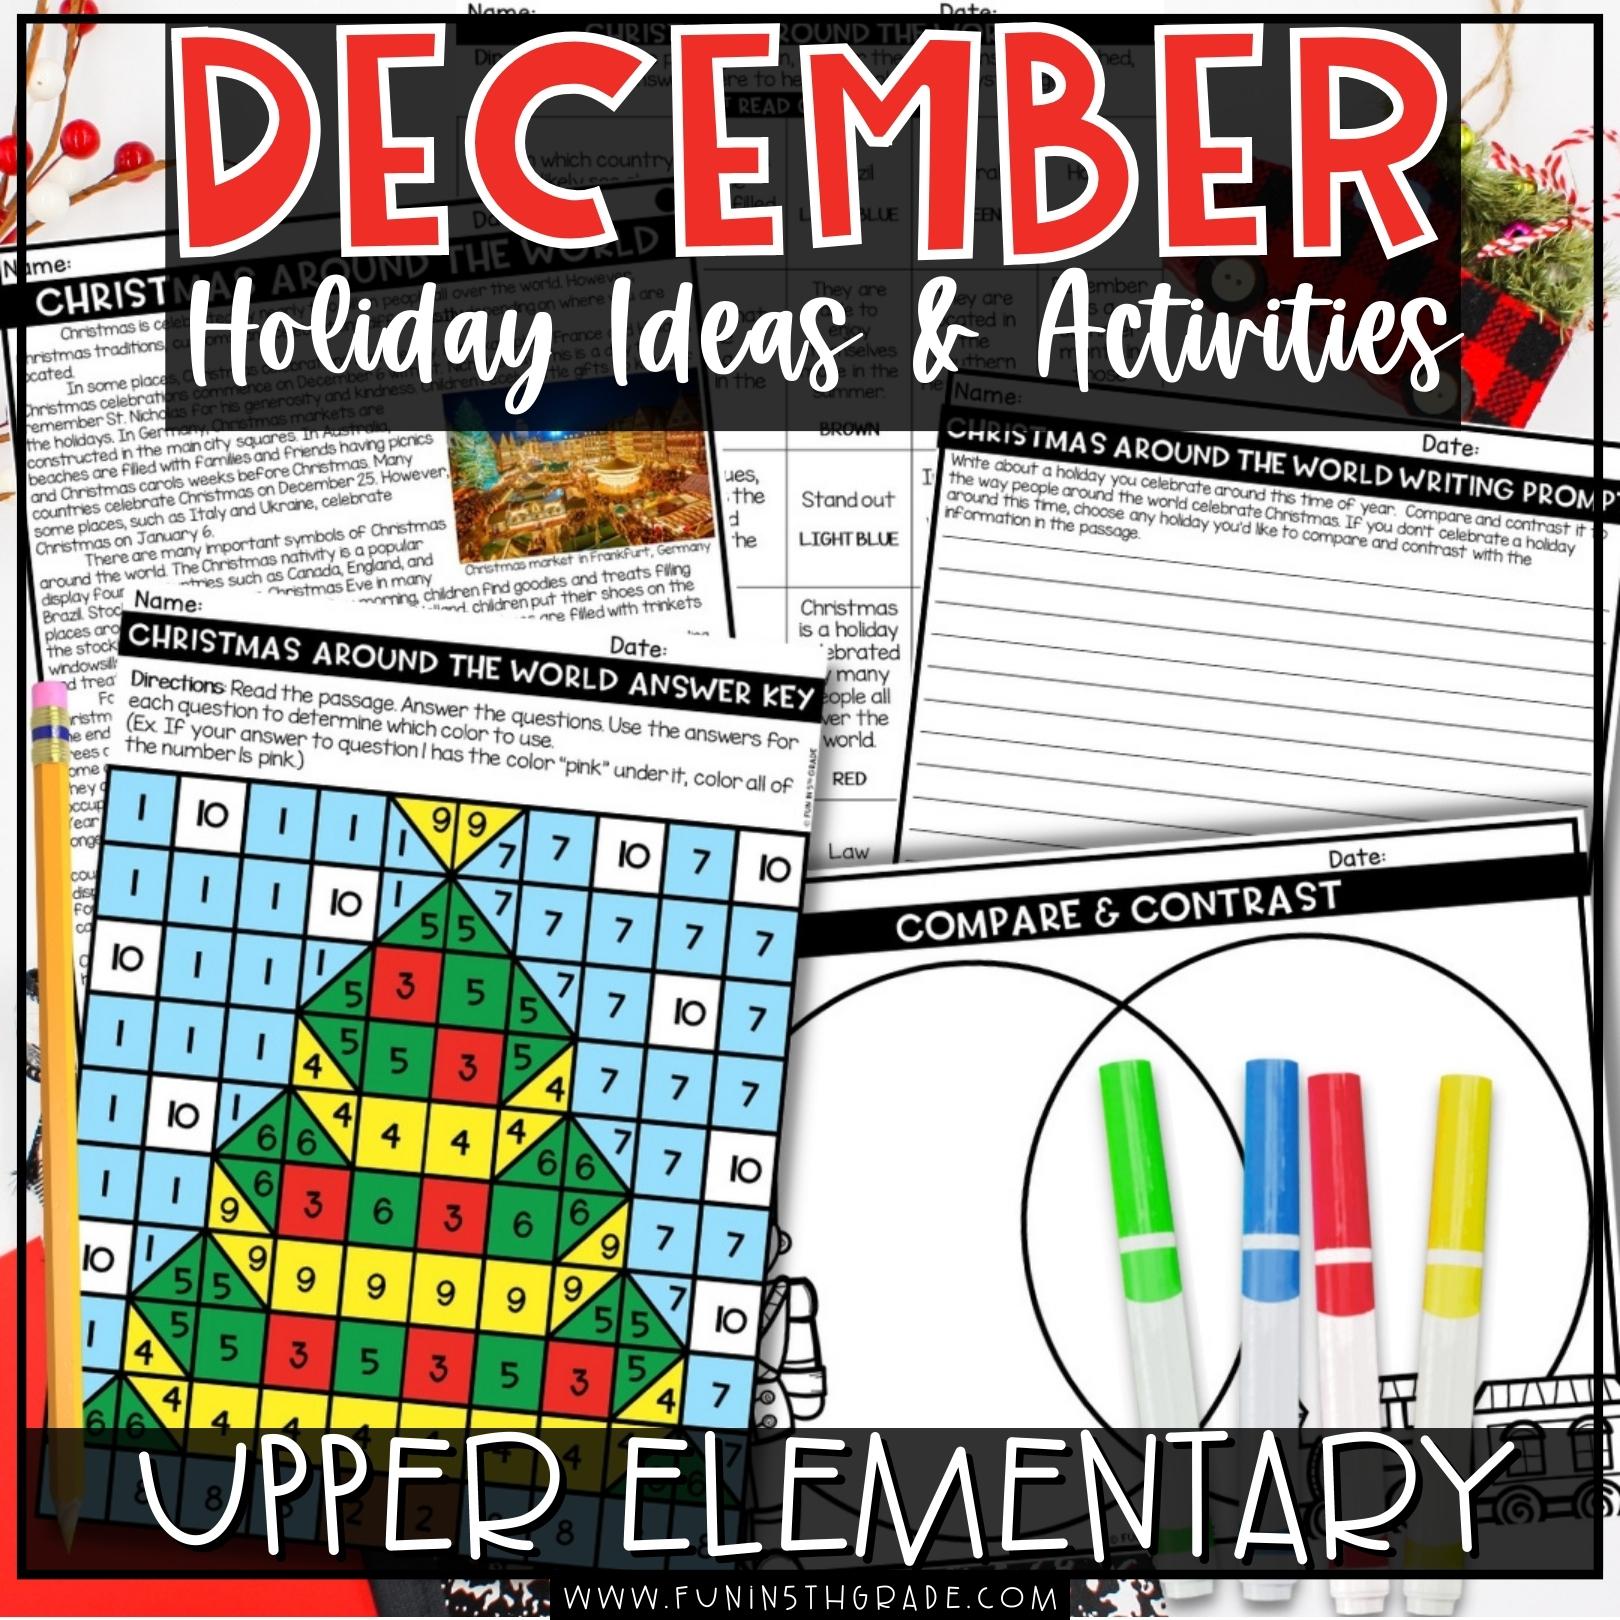 December Holiday Activities and Ideas